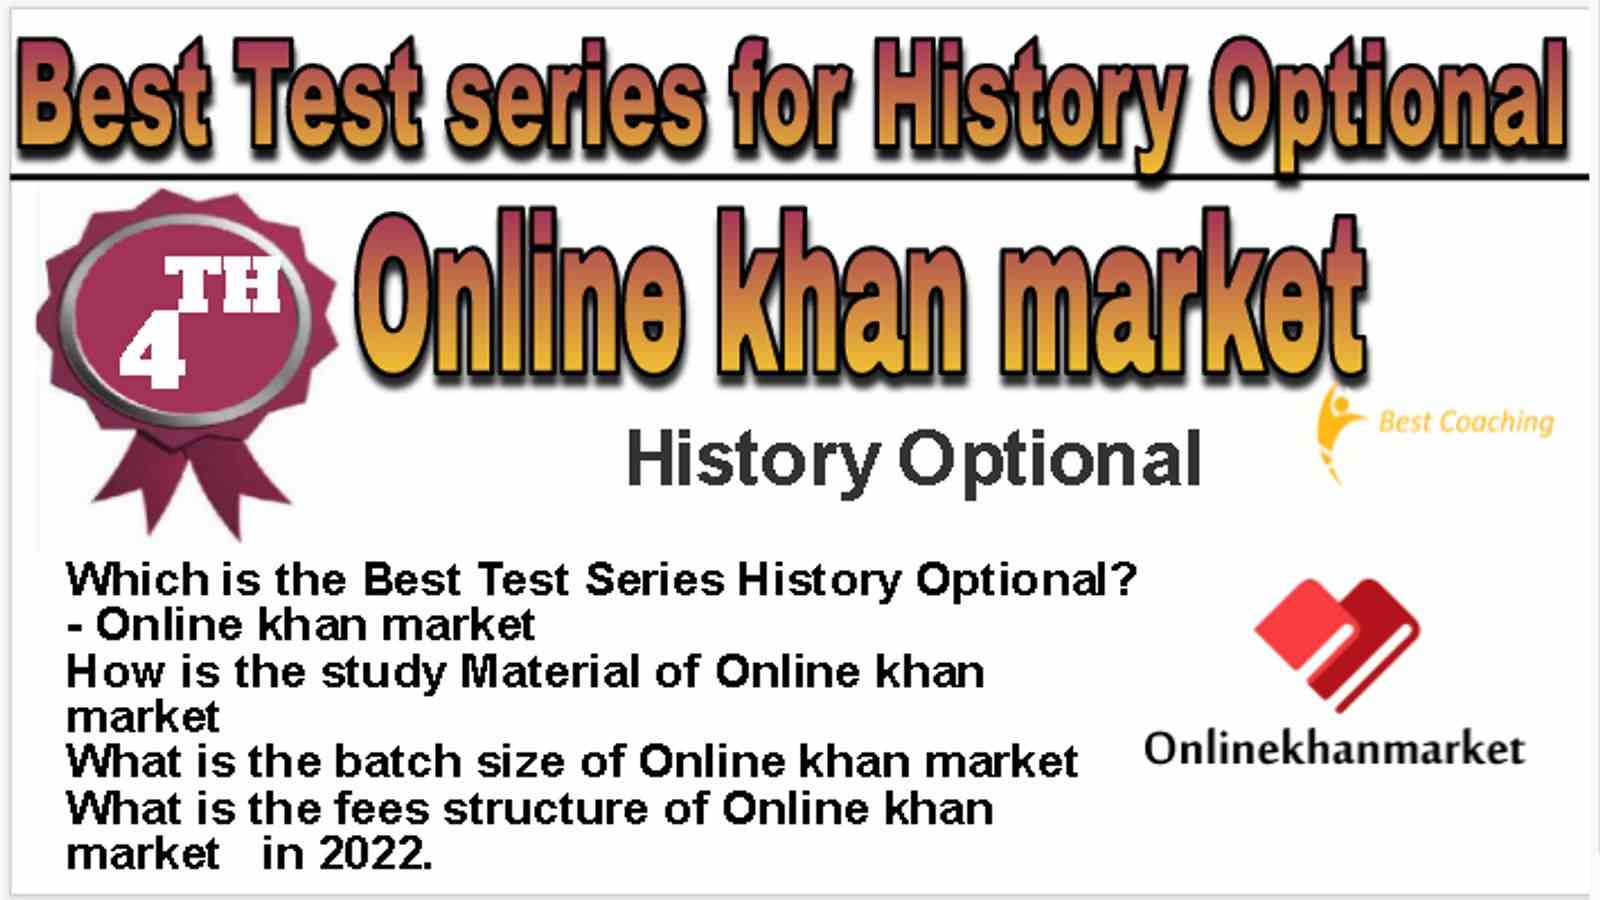 Rank 4 Best Test series for History Optional